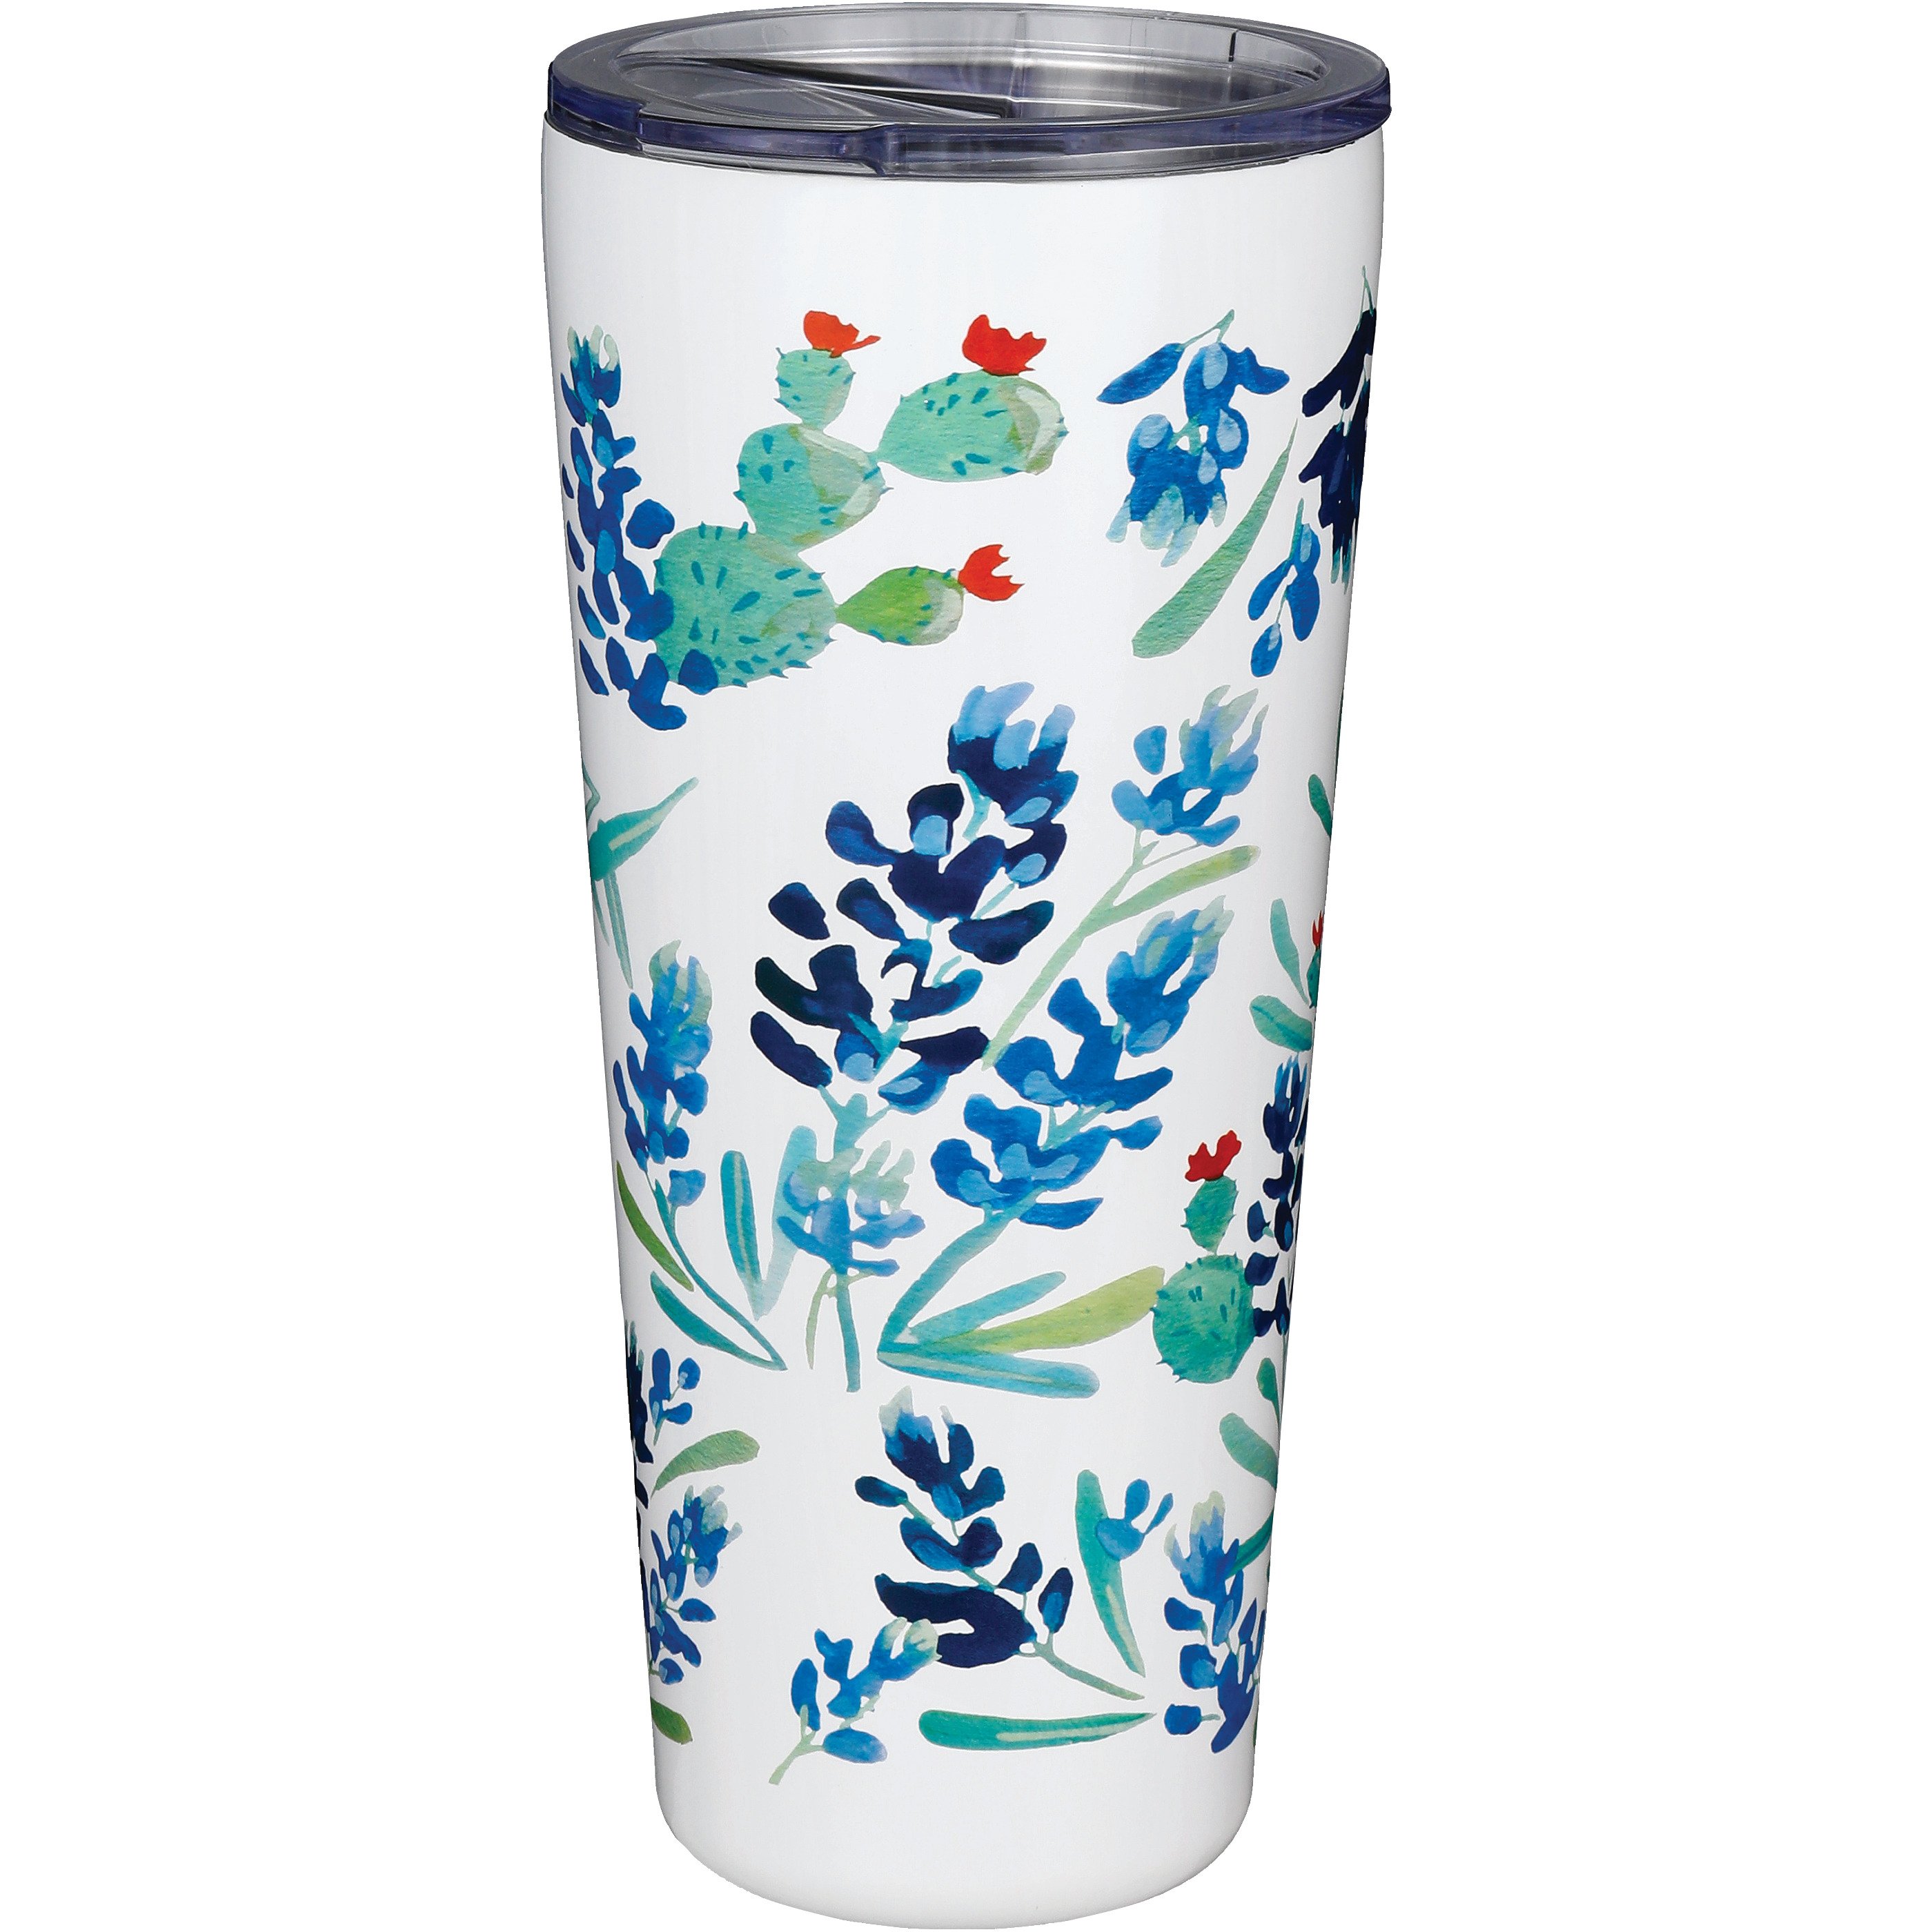 Destination Holiday Merry & Bright Stainless Steel Coffee Tumbler with  Handle - Shop Cups & Tumblers at H-E-B